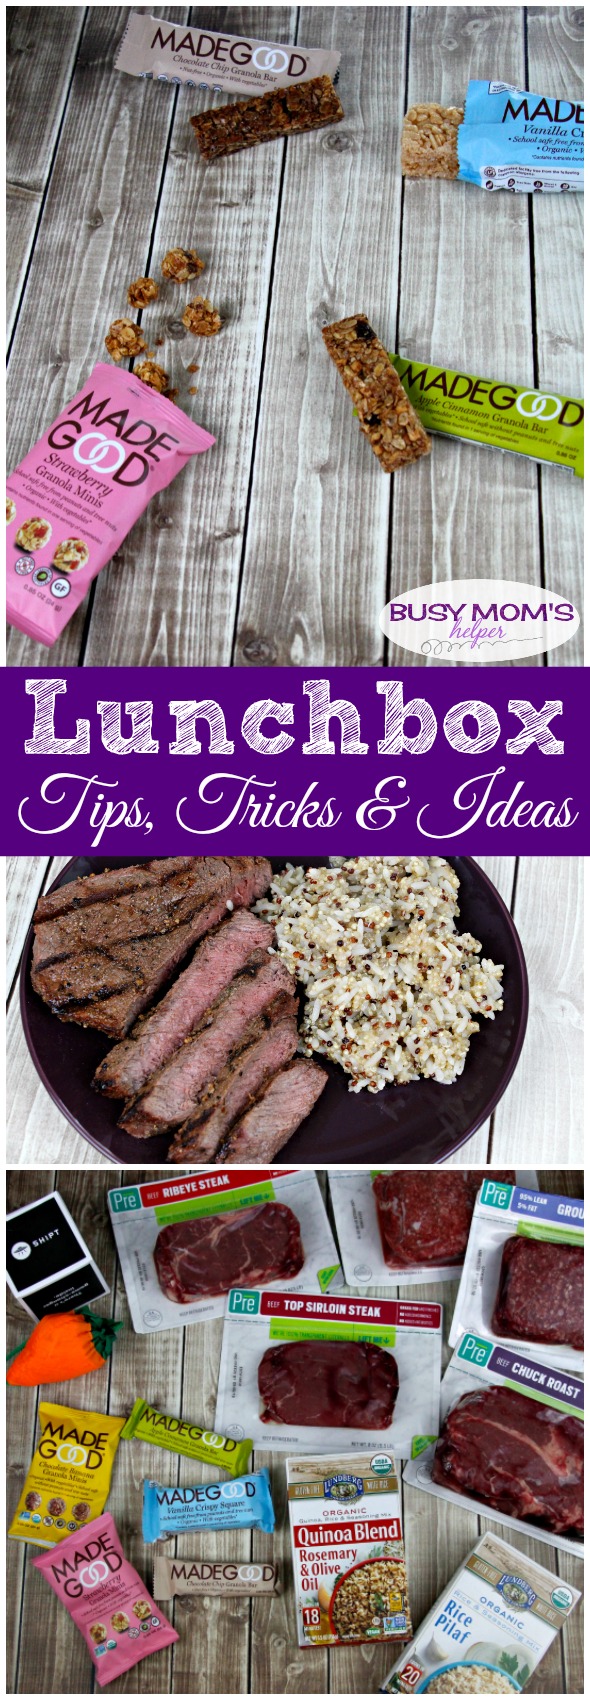 Lunchbox Tips, Tricks & Ideas to make parenting life easier! #AD #lunchboxx2018